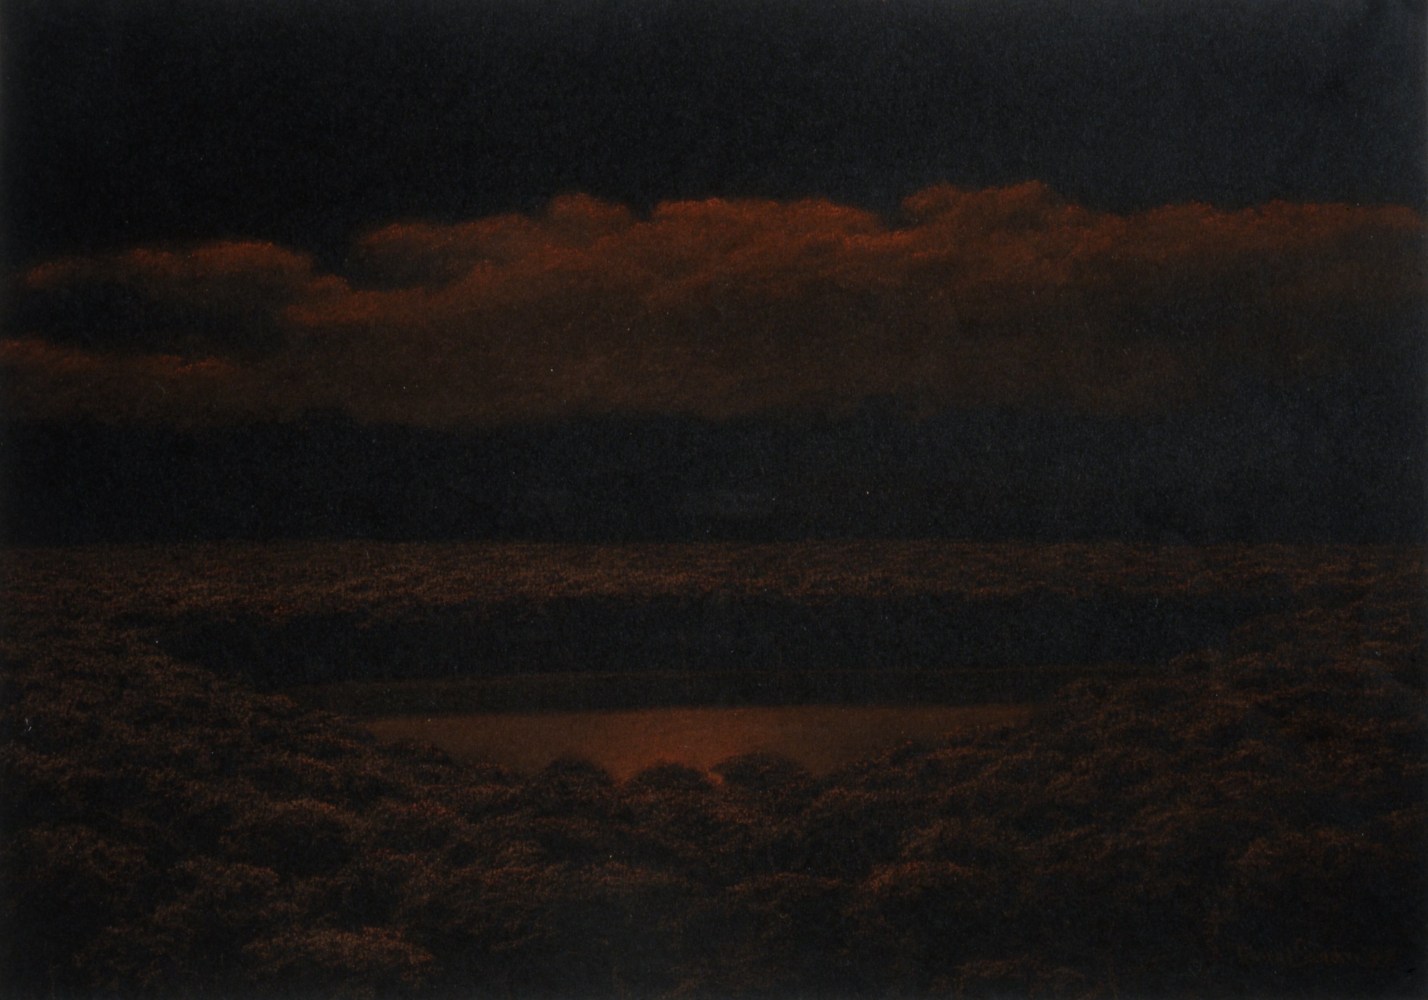 Tom&amp;aacute;s S&amp;aacute;nchez
Laguna (no. 46), 1998
cont&amp;eacute; on black paper
11 3/4&amp;times; 16 1/2 in. / 29.8 &amp;times; 41.9 cm